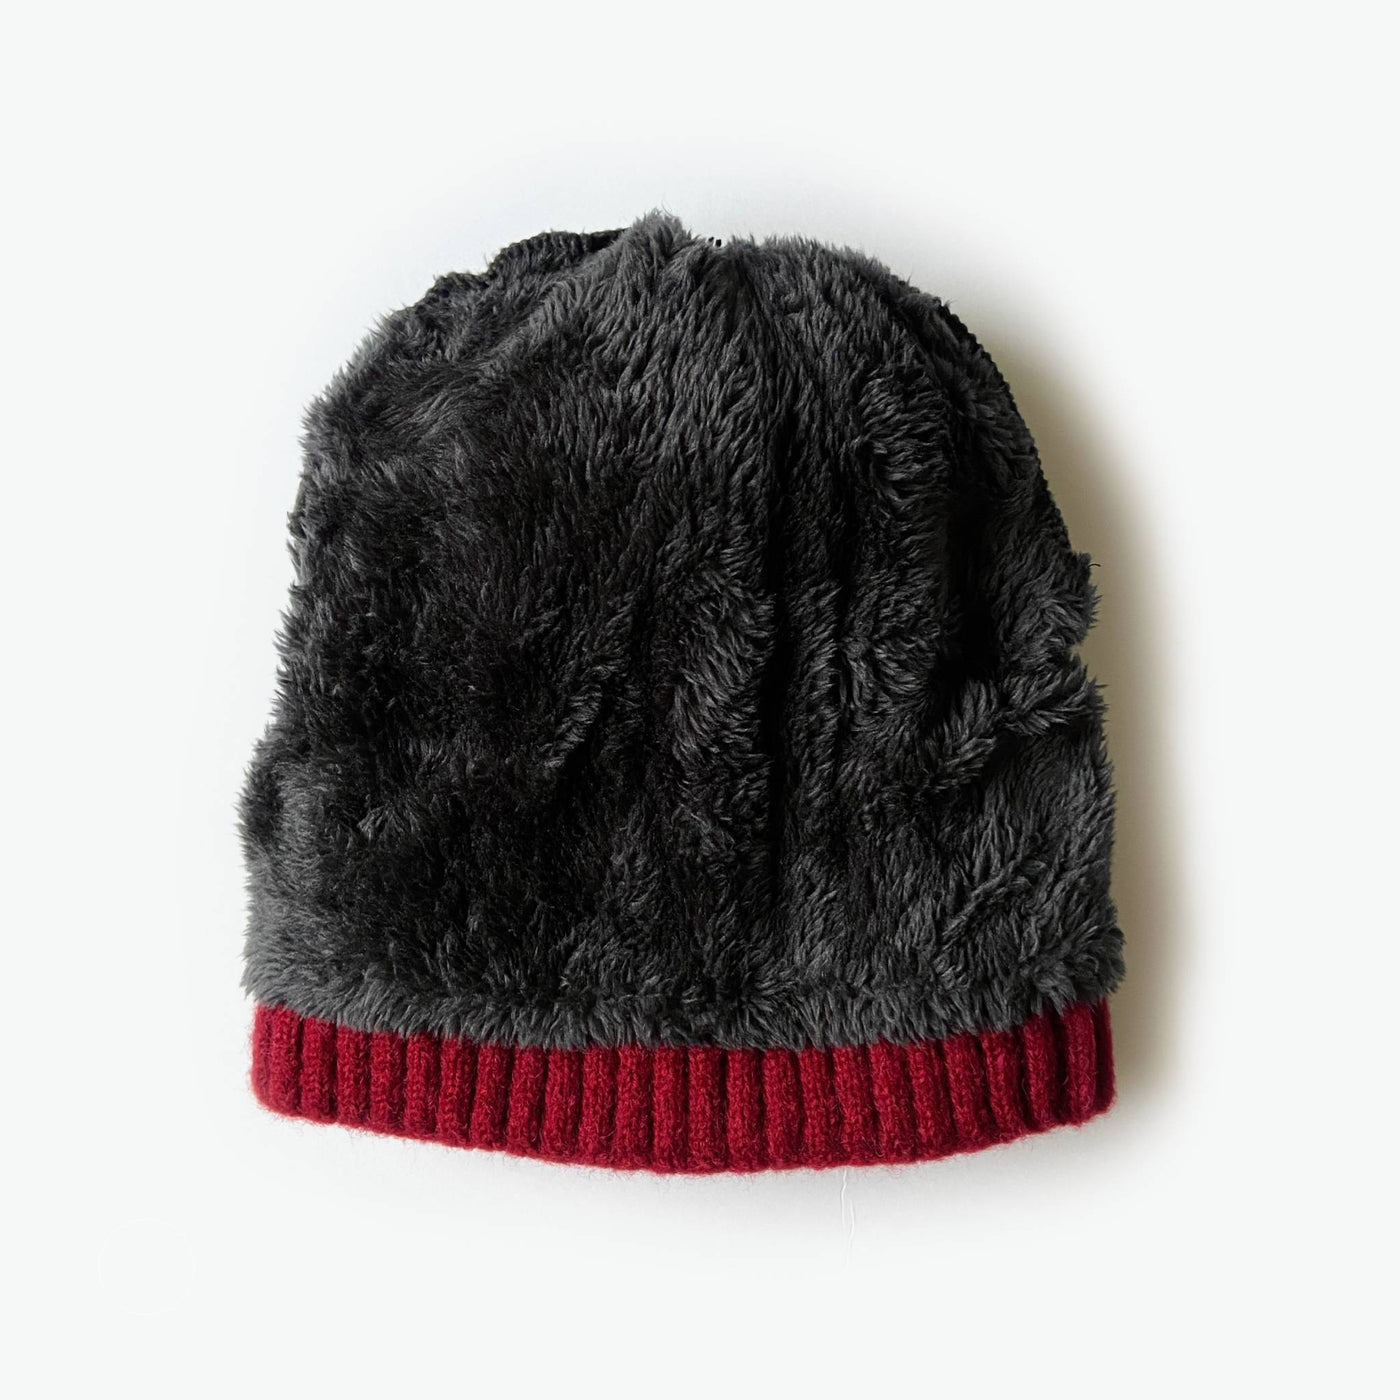 Kate Fleece Lined Beanie - Cranberry Red - The Pretty Hat